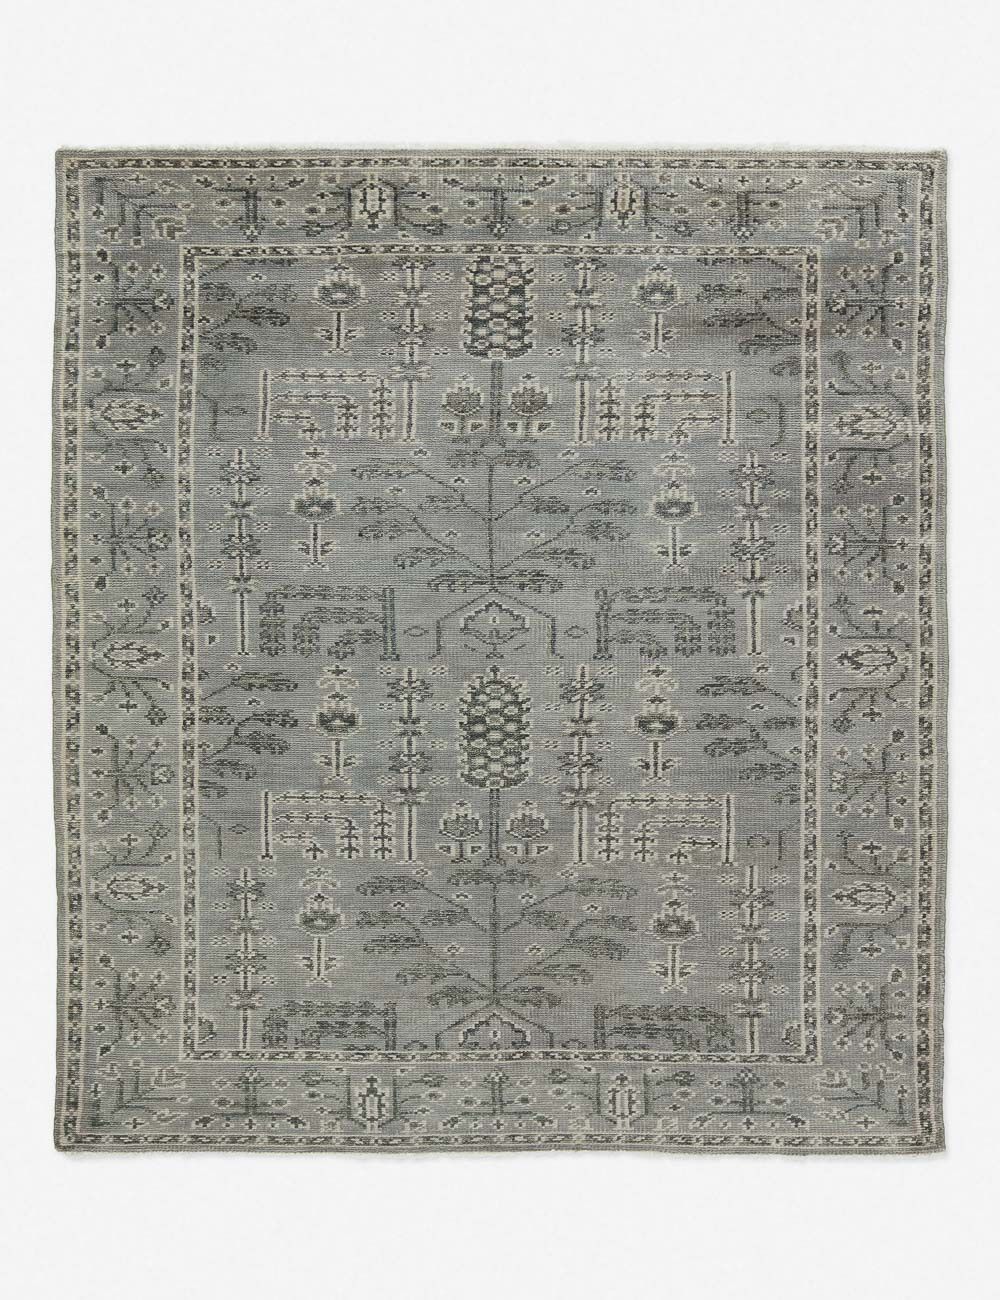 Ginerva Elegance Hand-Knotted Wool Area Rug in Light Gray 8'6" x 11'6"